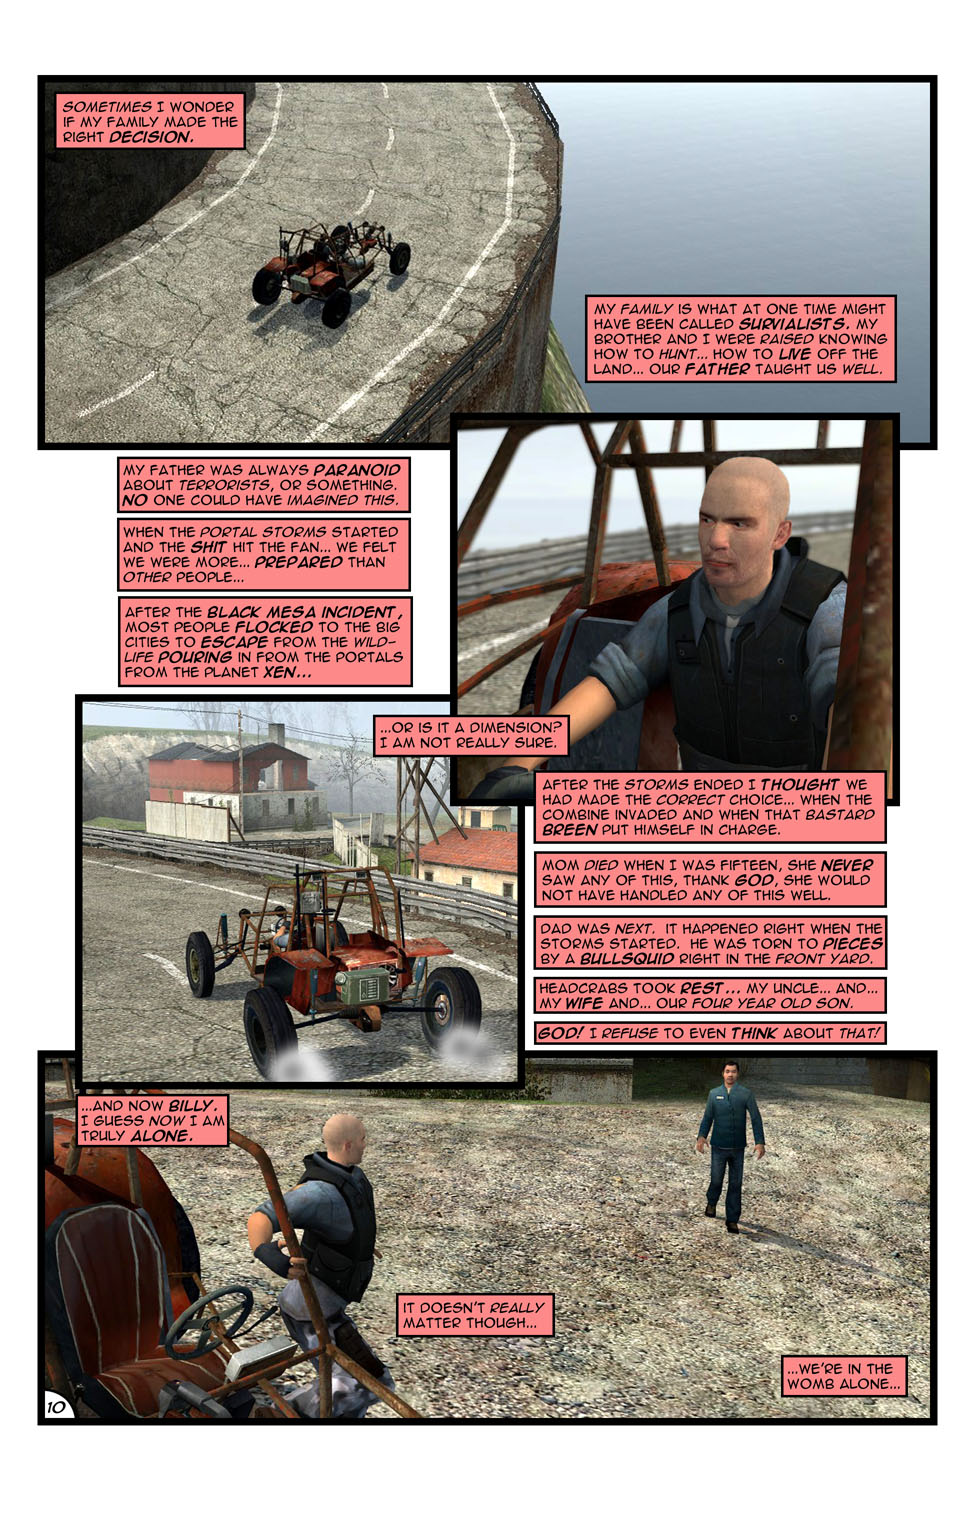 As he drives away and reaches Highway 17, Jack reminisces about his family history of survivalism. His father taught Jack and Billy to live off the land as hunters and, when the Black Mesa Incident brought hostile alien creatures to Earth and then the Combine invaded and took over the planet, they managed to survive off-grid. As he realizes he is now truly alone, Jack reaches his destination and exits the buggy.